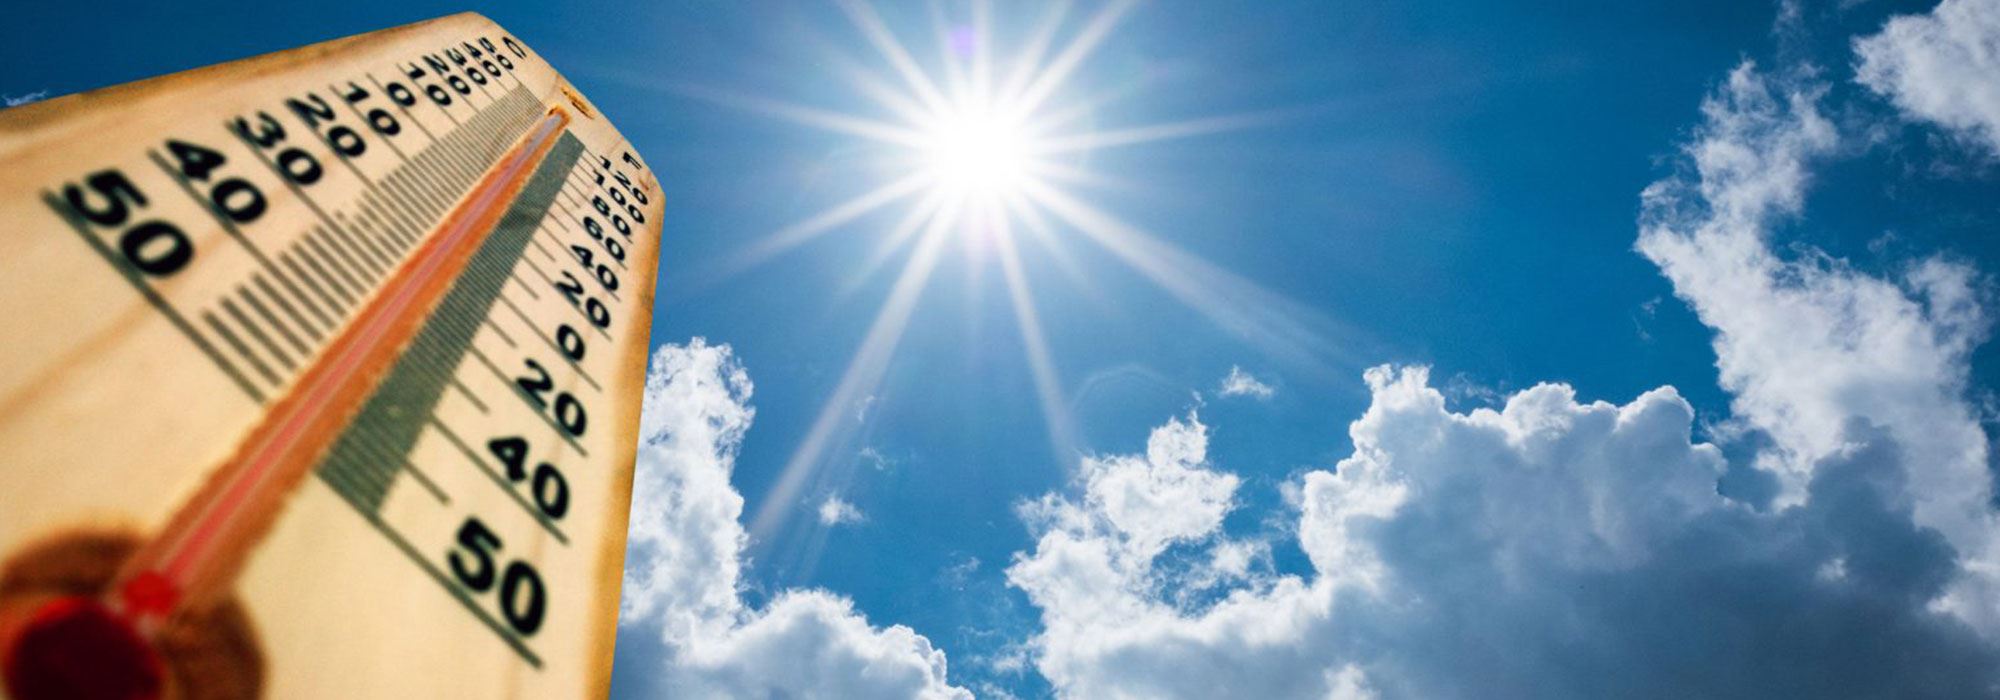 sun beaming with blue skies, high temperature on heat thermometer